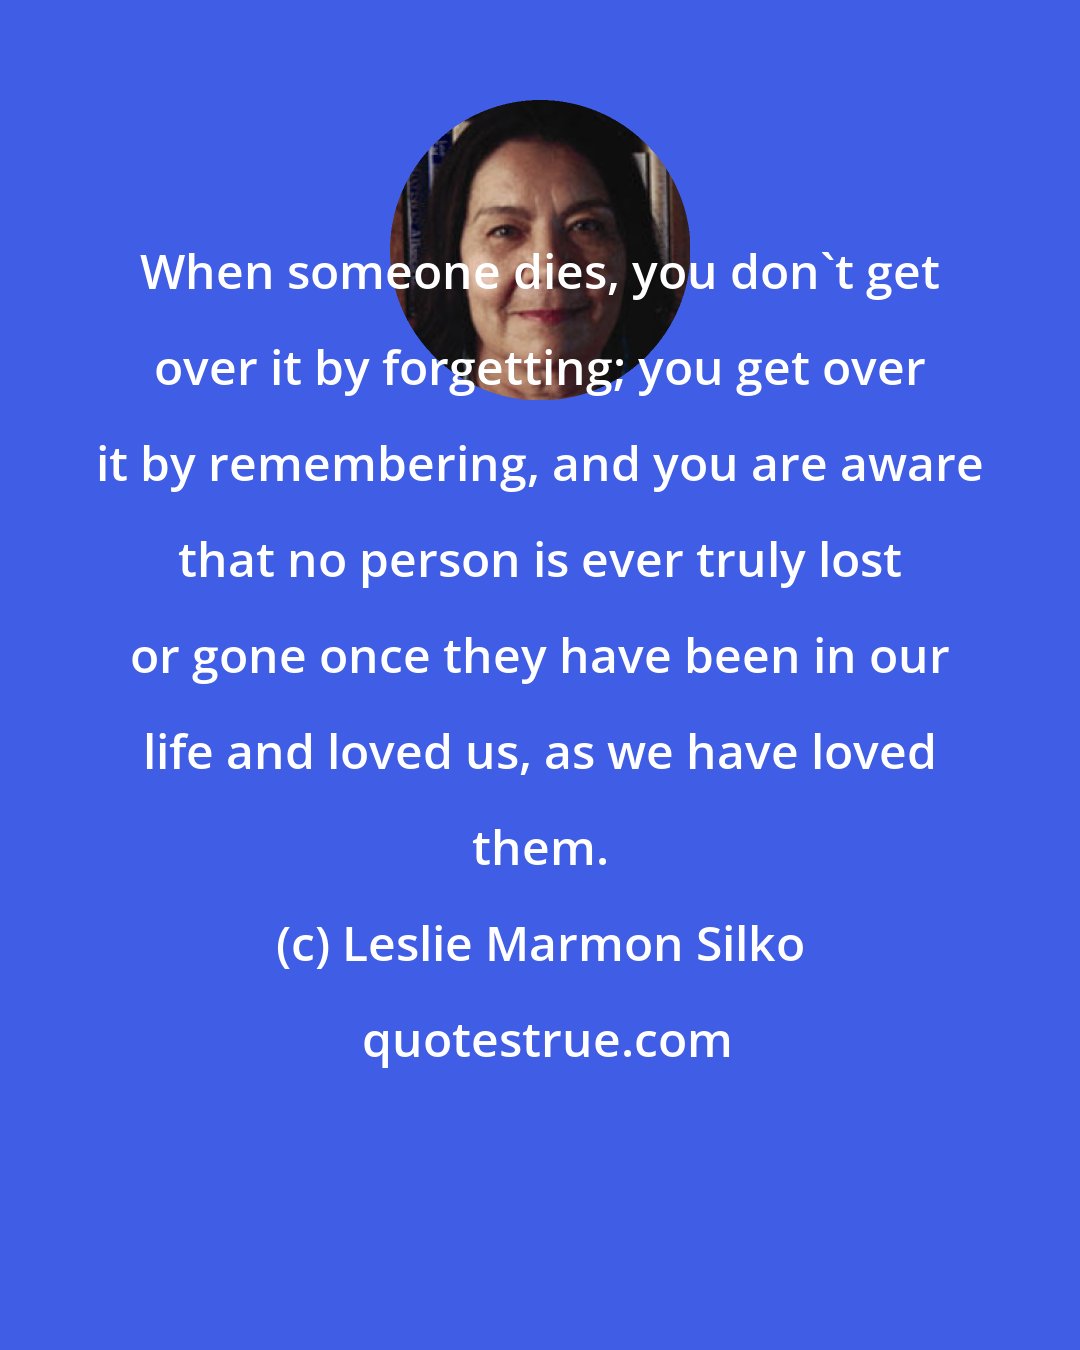 Leslie Marmon Silko: When someone dies, you don't get over it by forgetting; you get over it by remembering, and you are aware that no person is ever truly lost or gone once they have been in our life and loved us, as we have loved them.